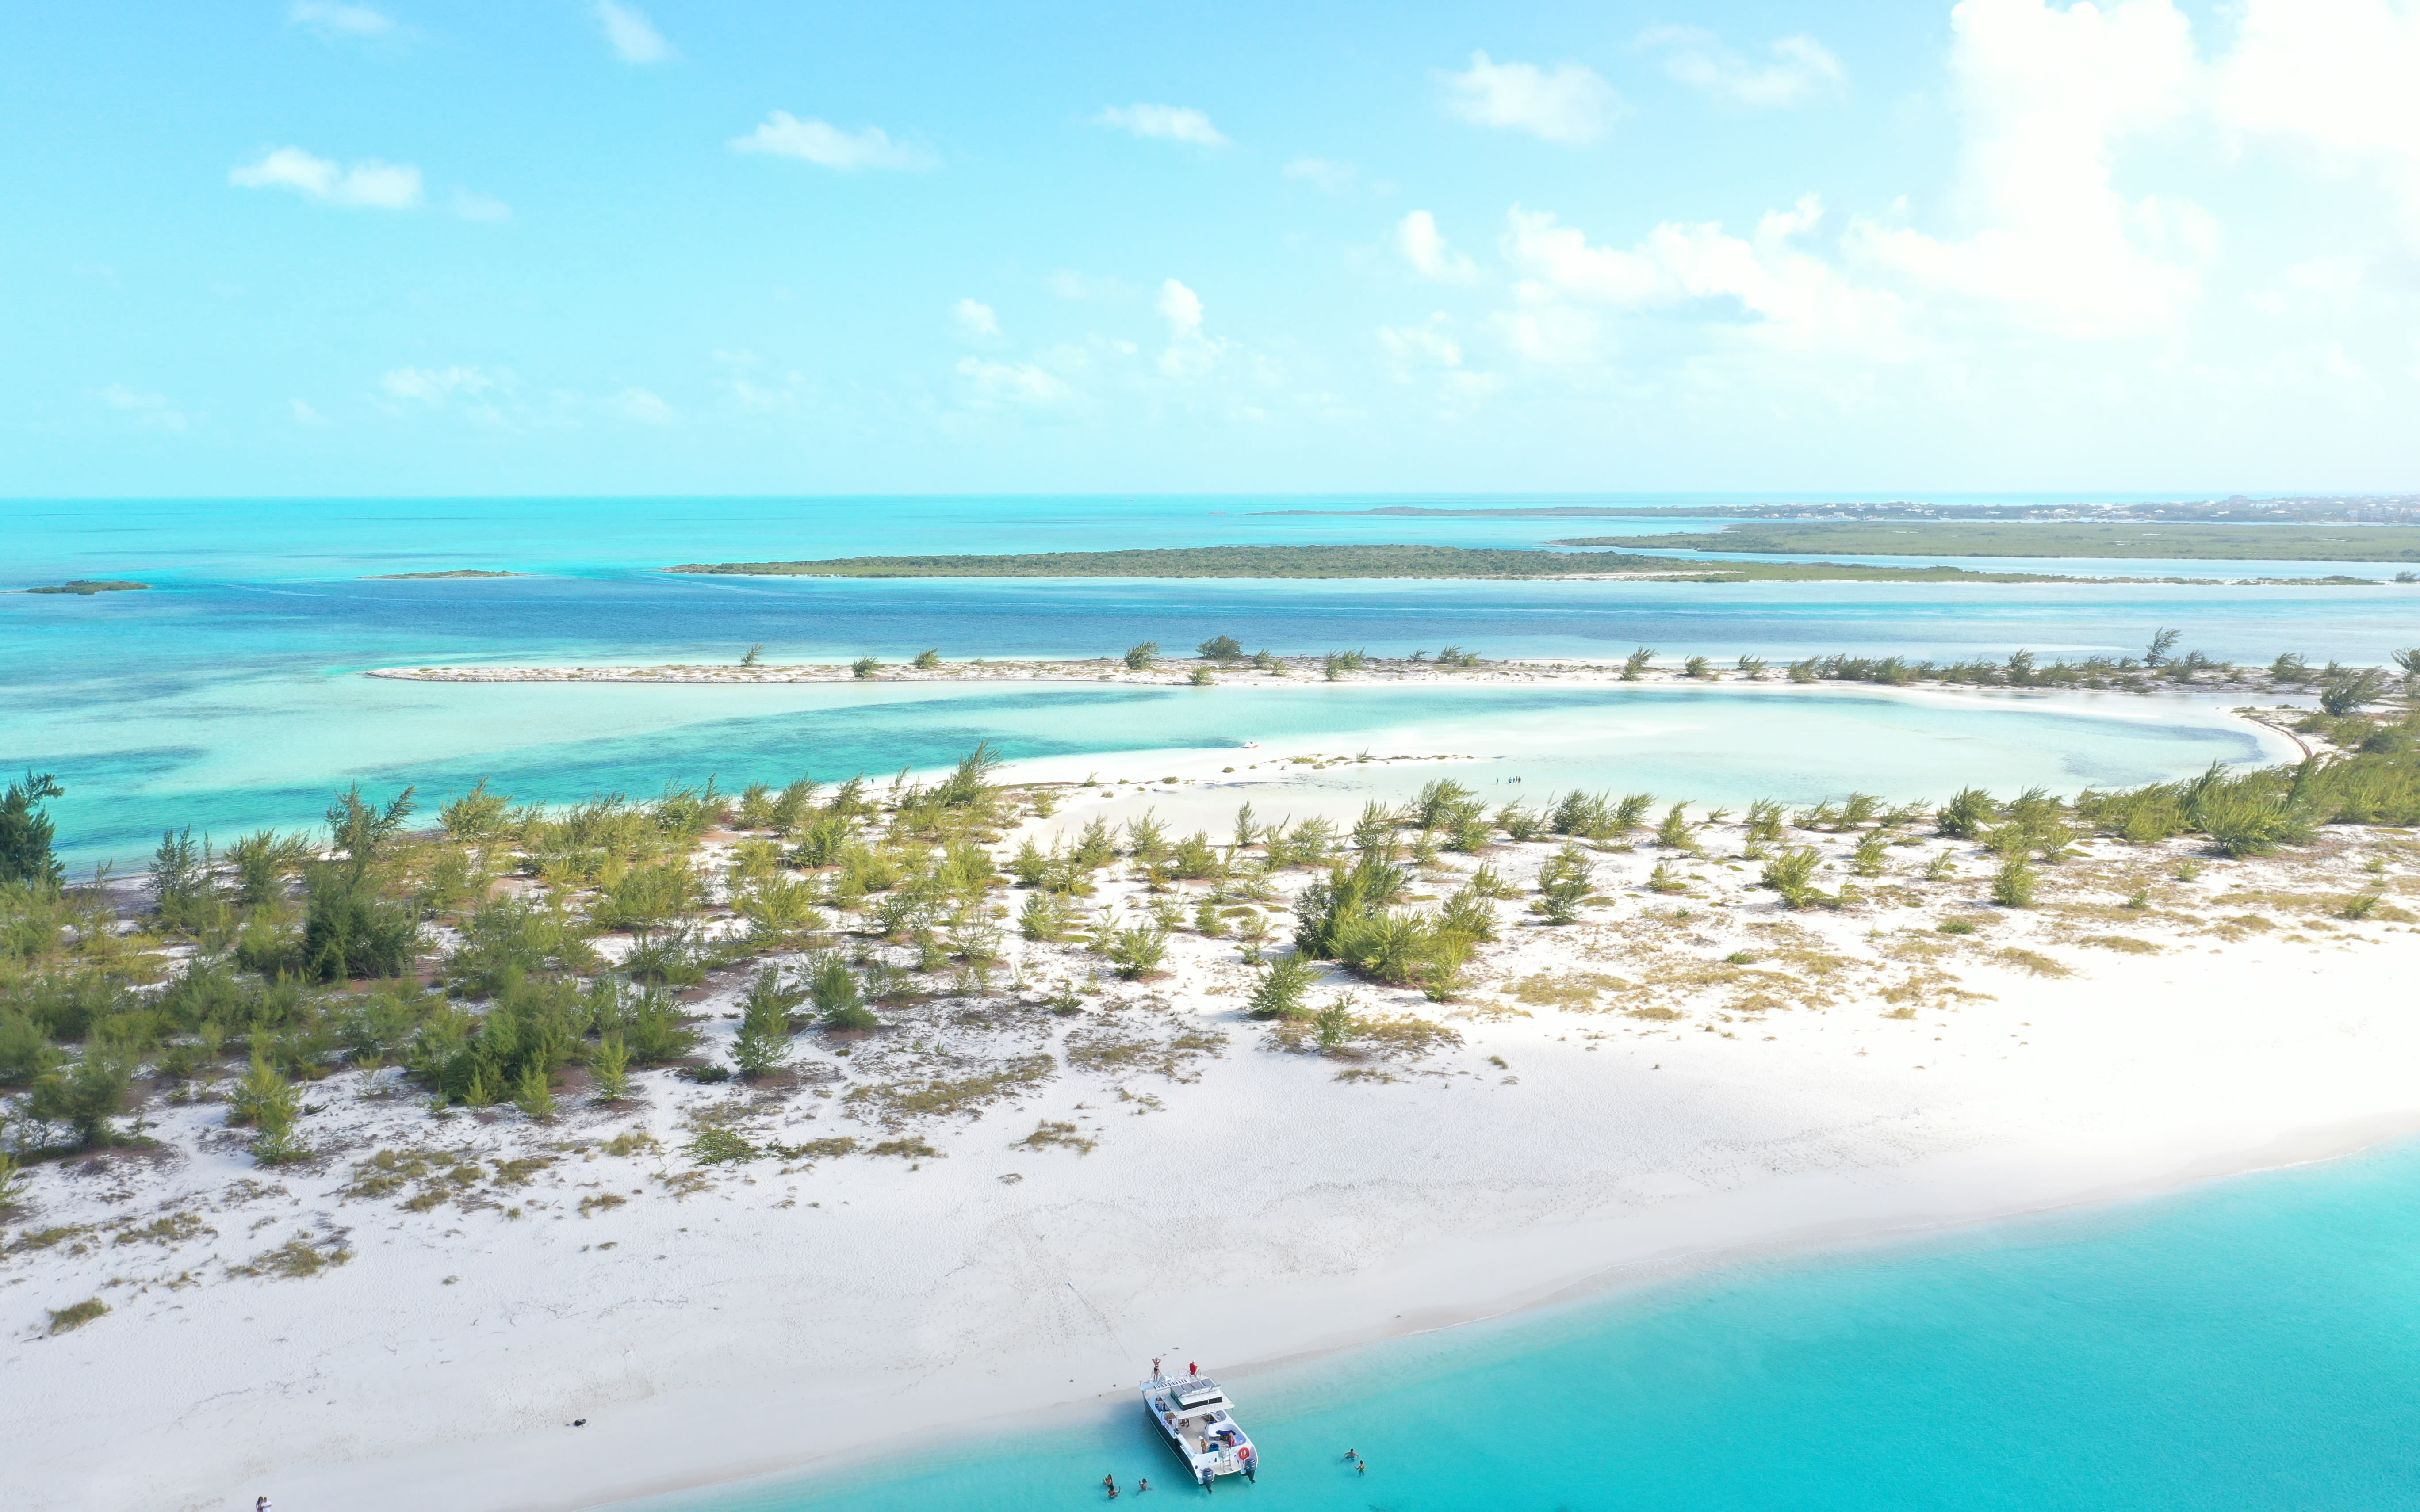 An image of Turks and Caicos